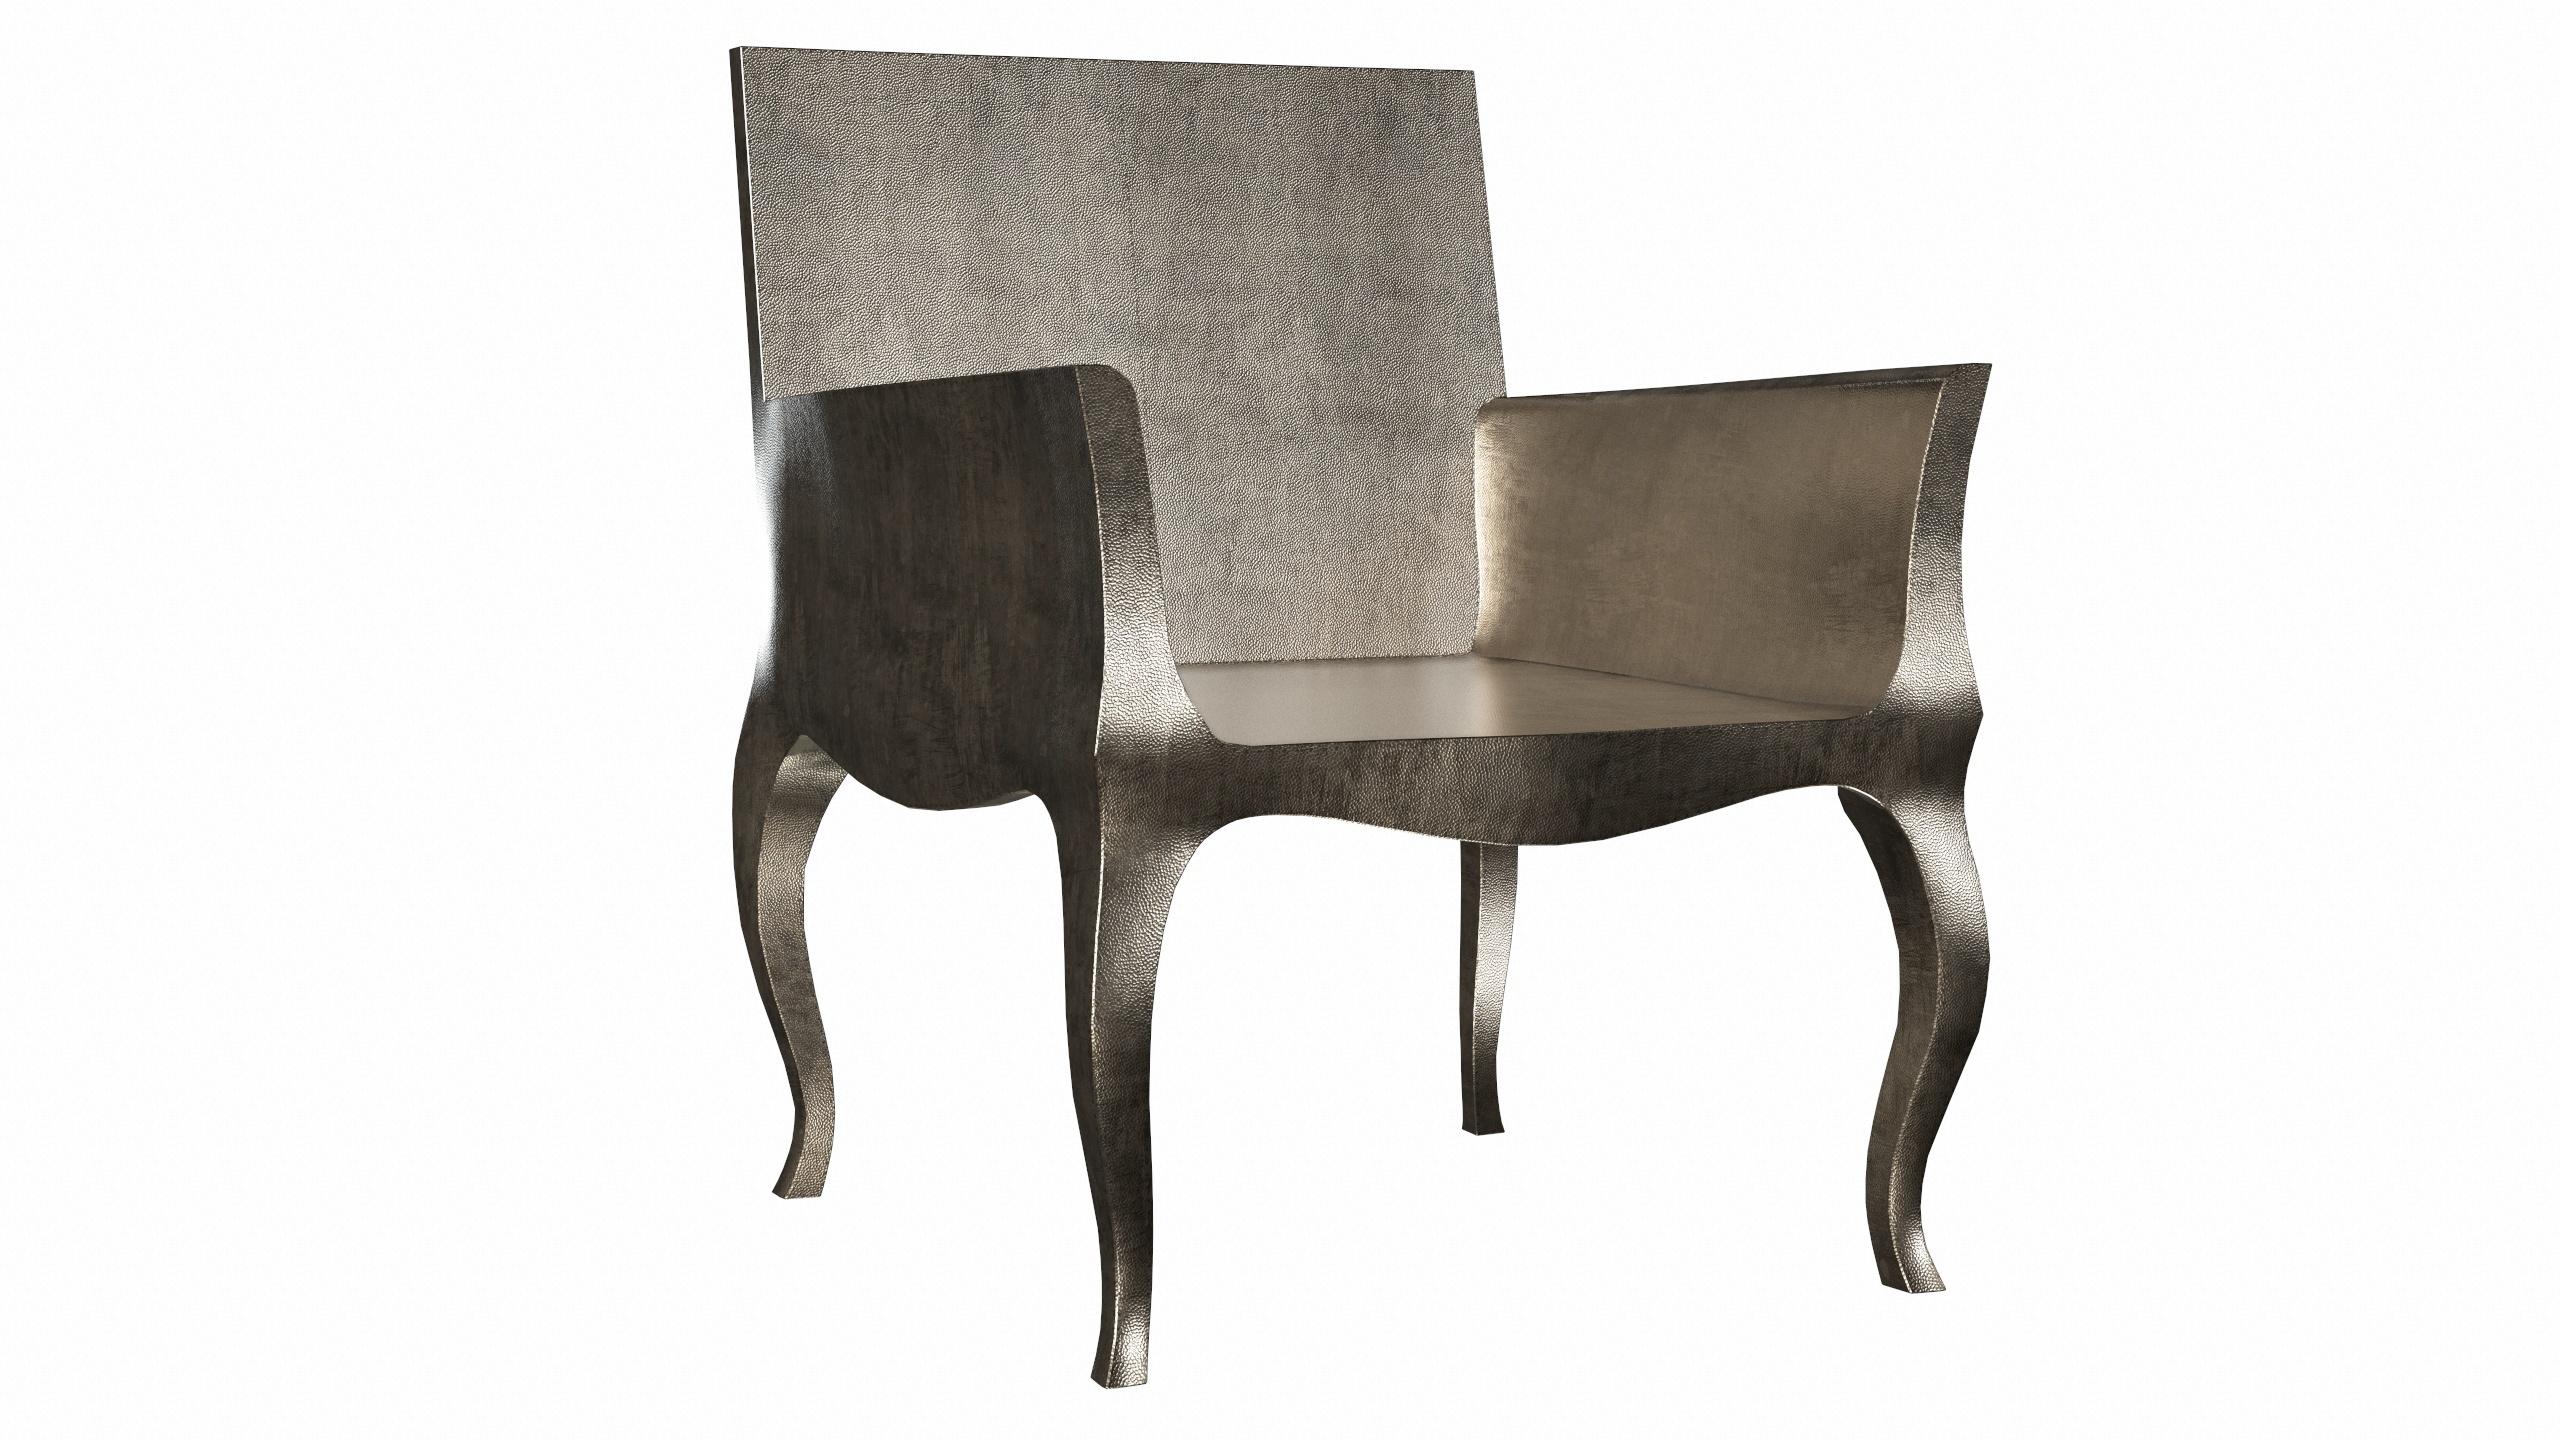 Contemporary Antique Art Deco Chairs Mid Hammered in Antique Bronze by Paul Mathieu For Sale